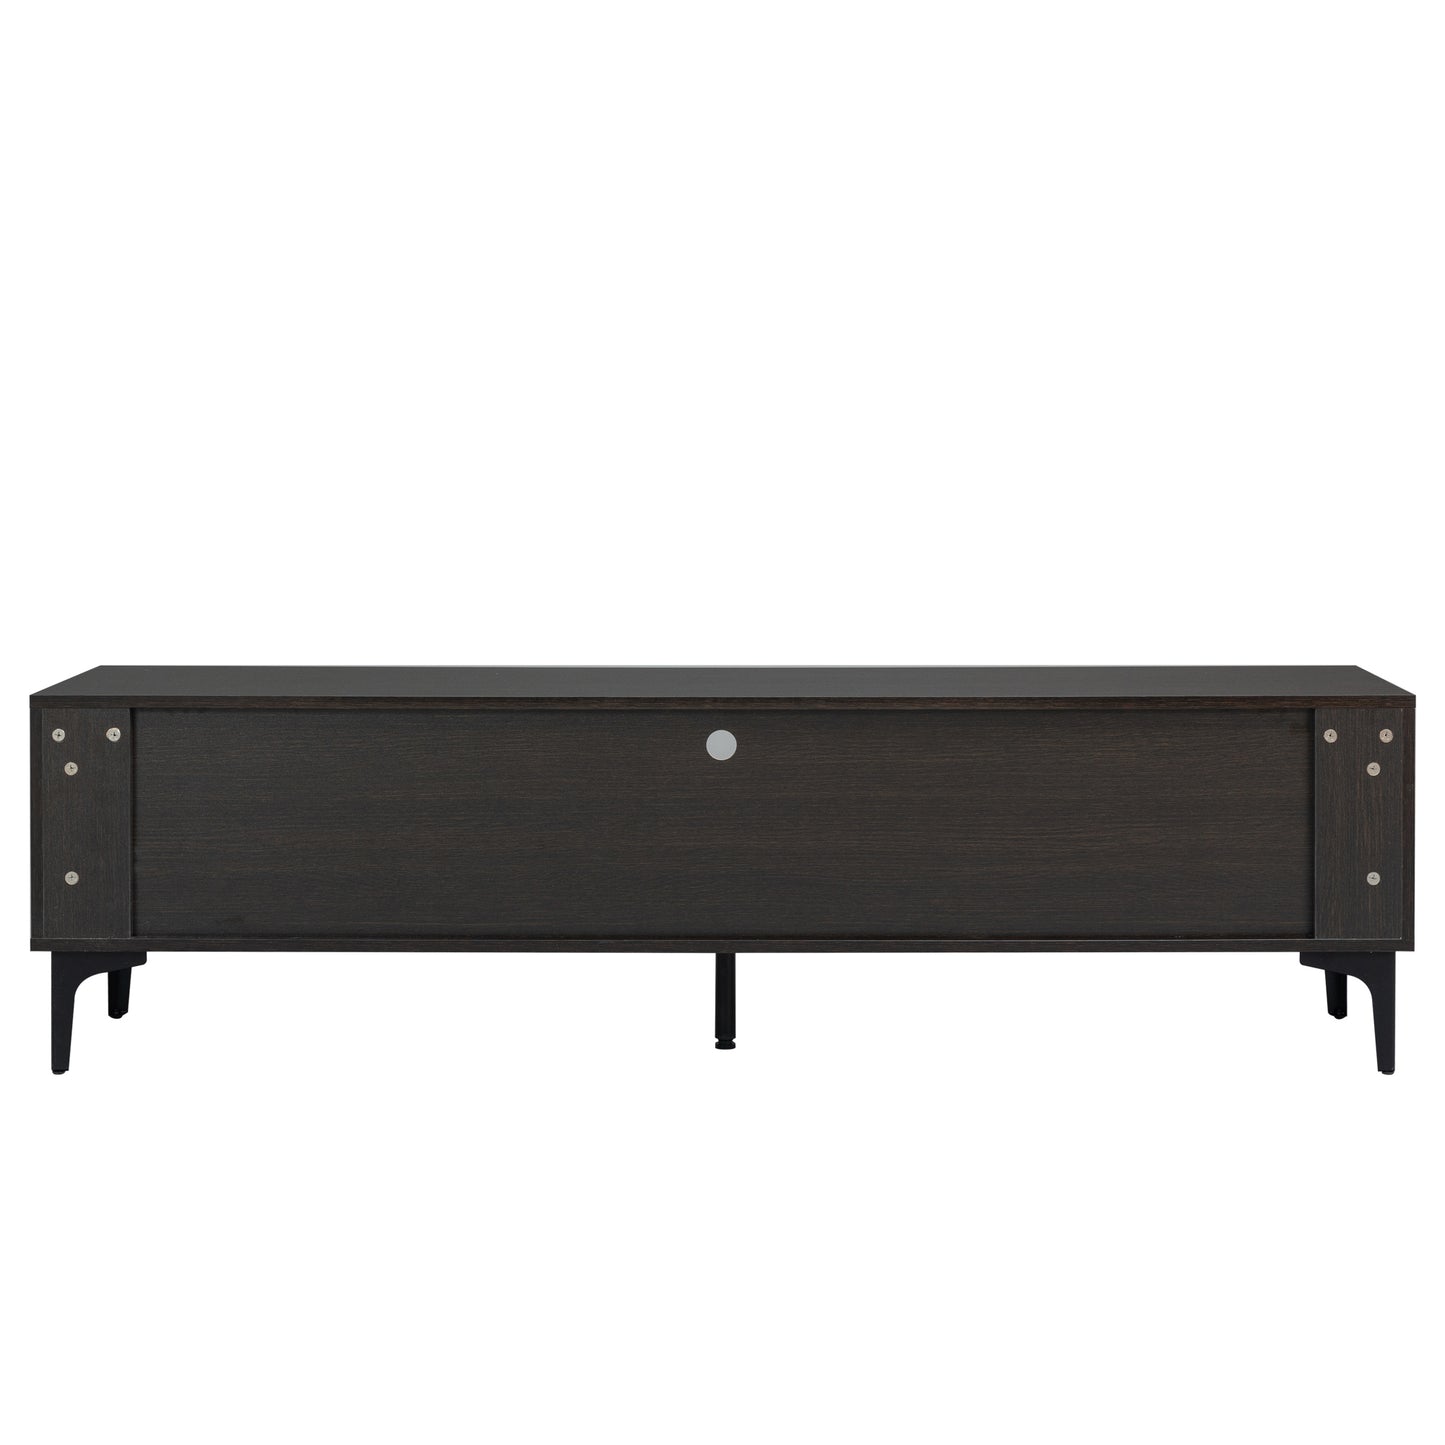 TV stand,TV Cabinet,entertainment center,TV console,media console,with LED remote control lights,UV bloom drawer panel,ferrous legs,can be placed in the living room, bedroom, color: Dark Brown+black